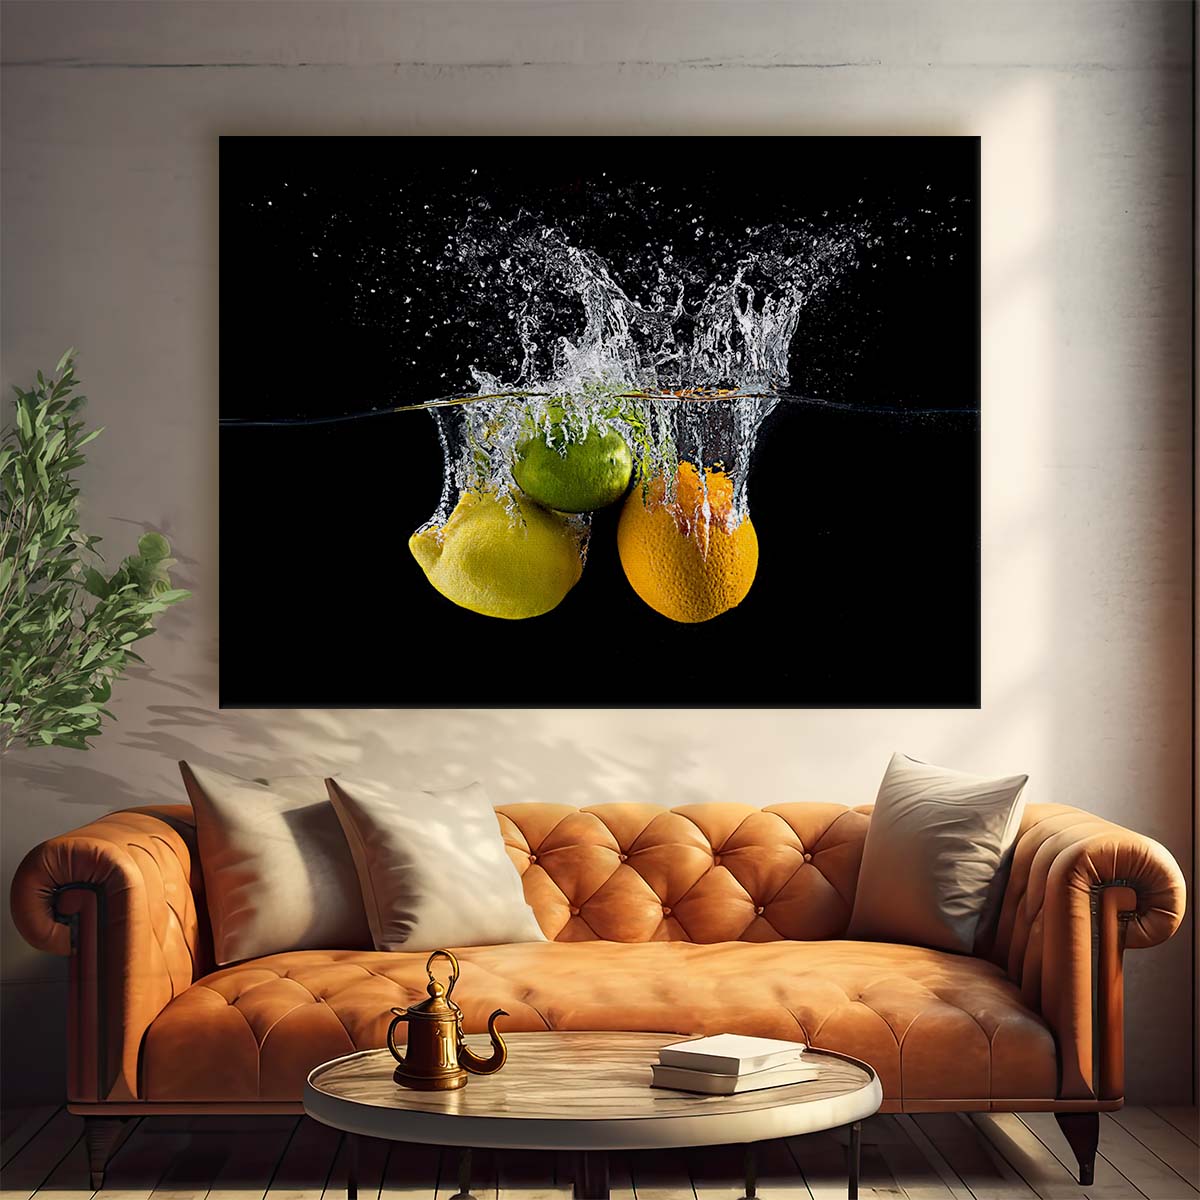 Vibrant Citrus Splash Colorful Kitchen Wall Art by Luxuriance Designs. Made in USA.